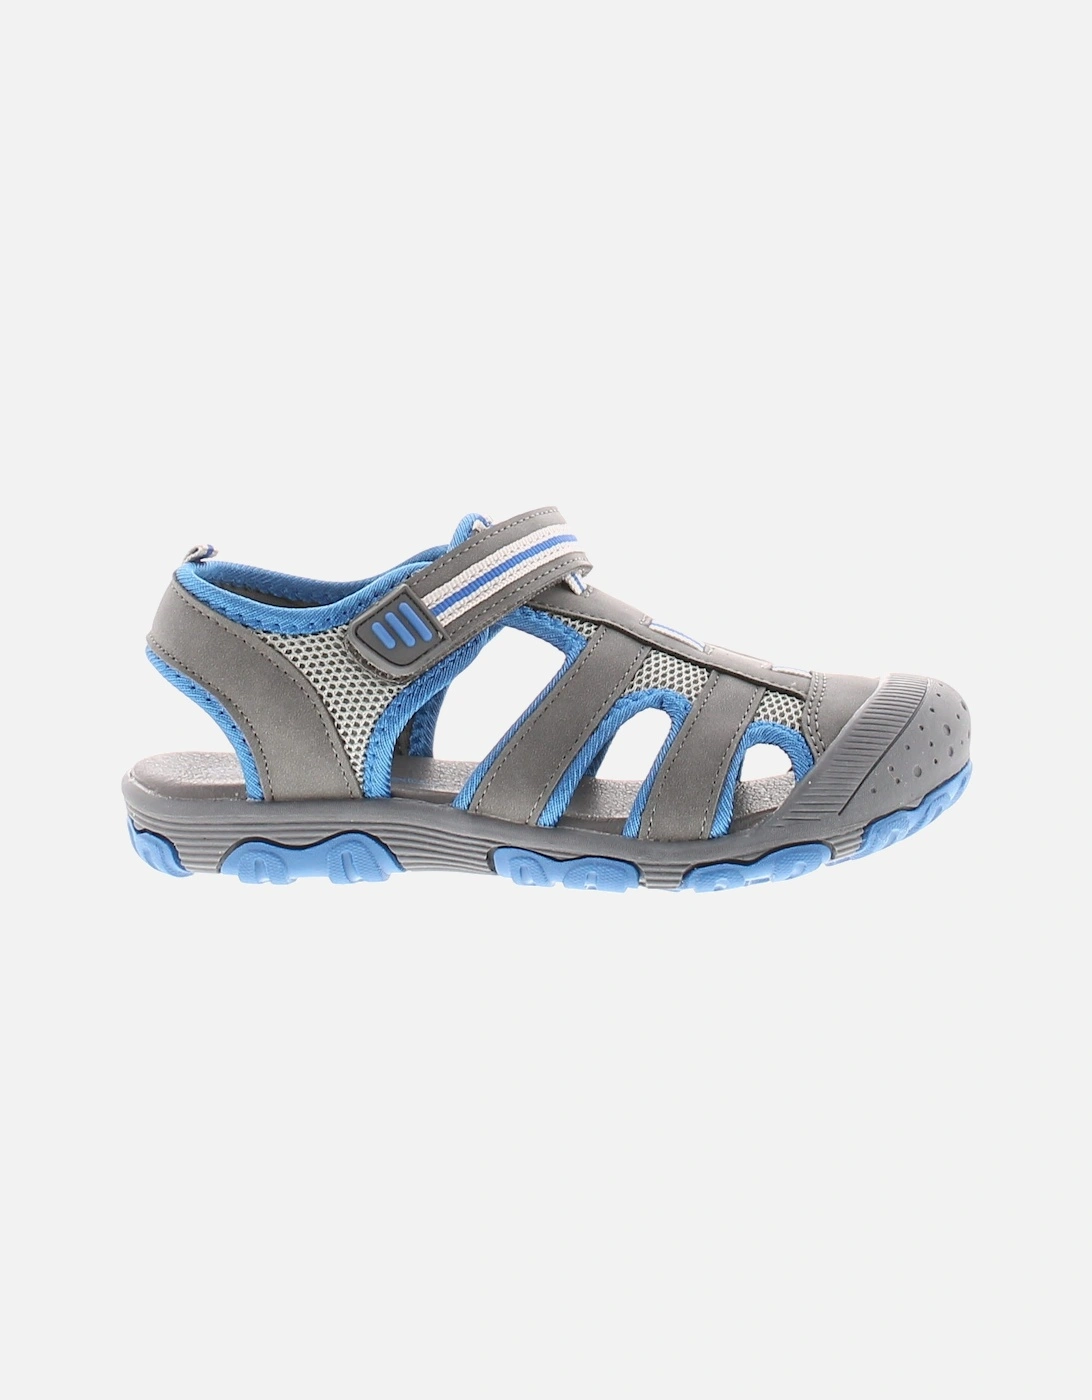 Younger Childrens Sandals Jude grey UK Size